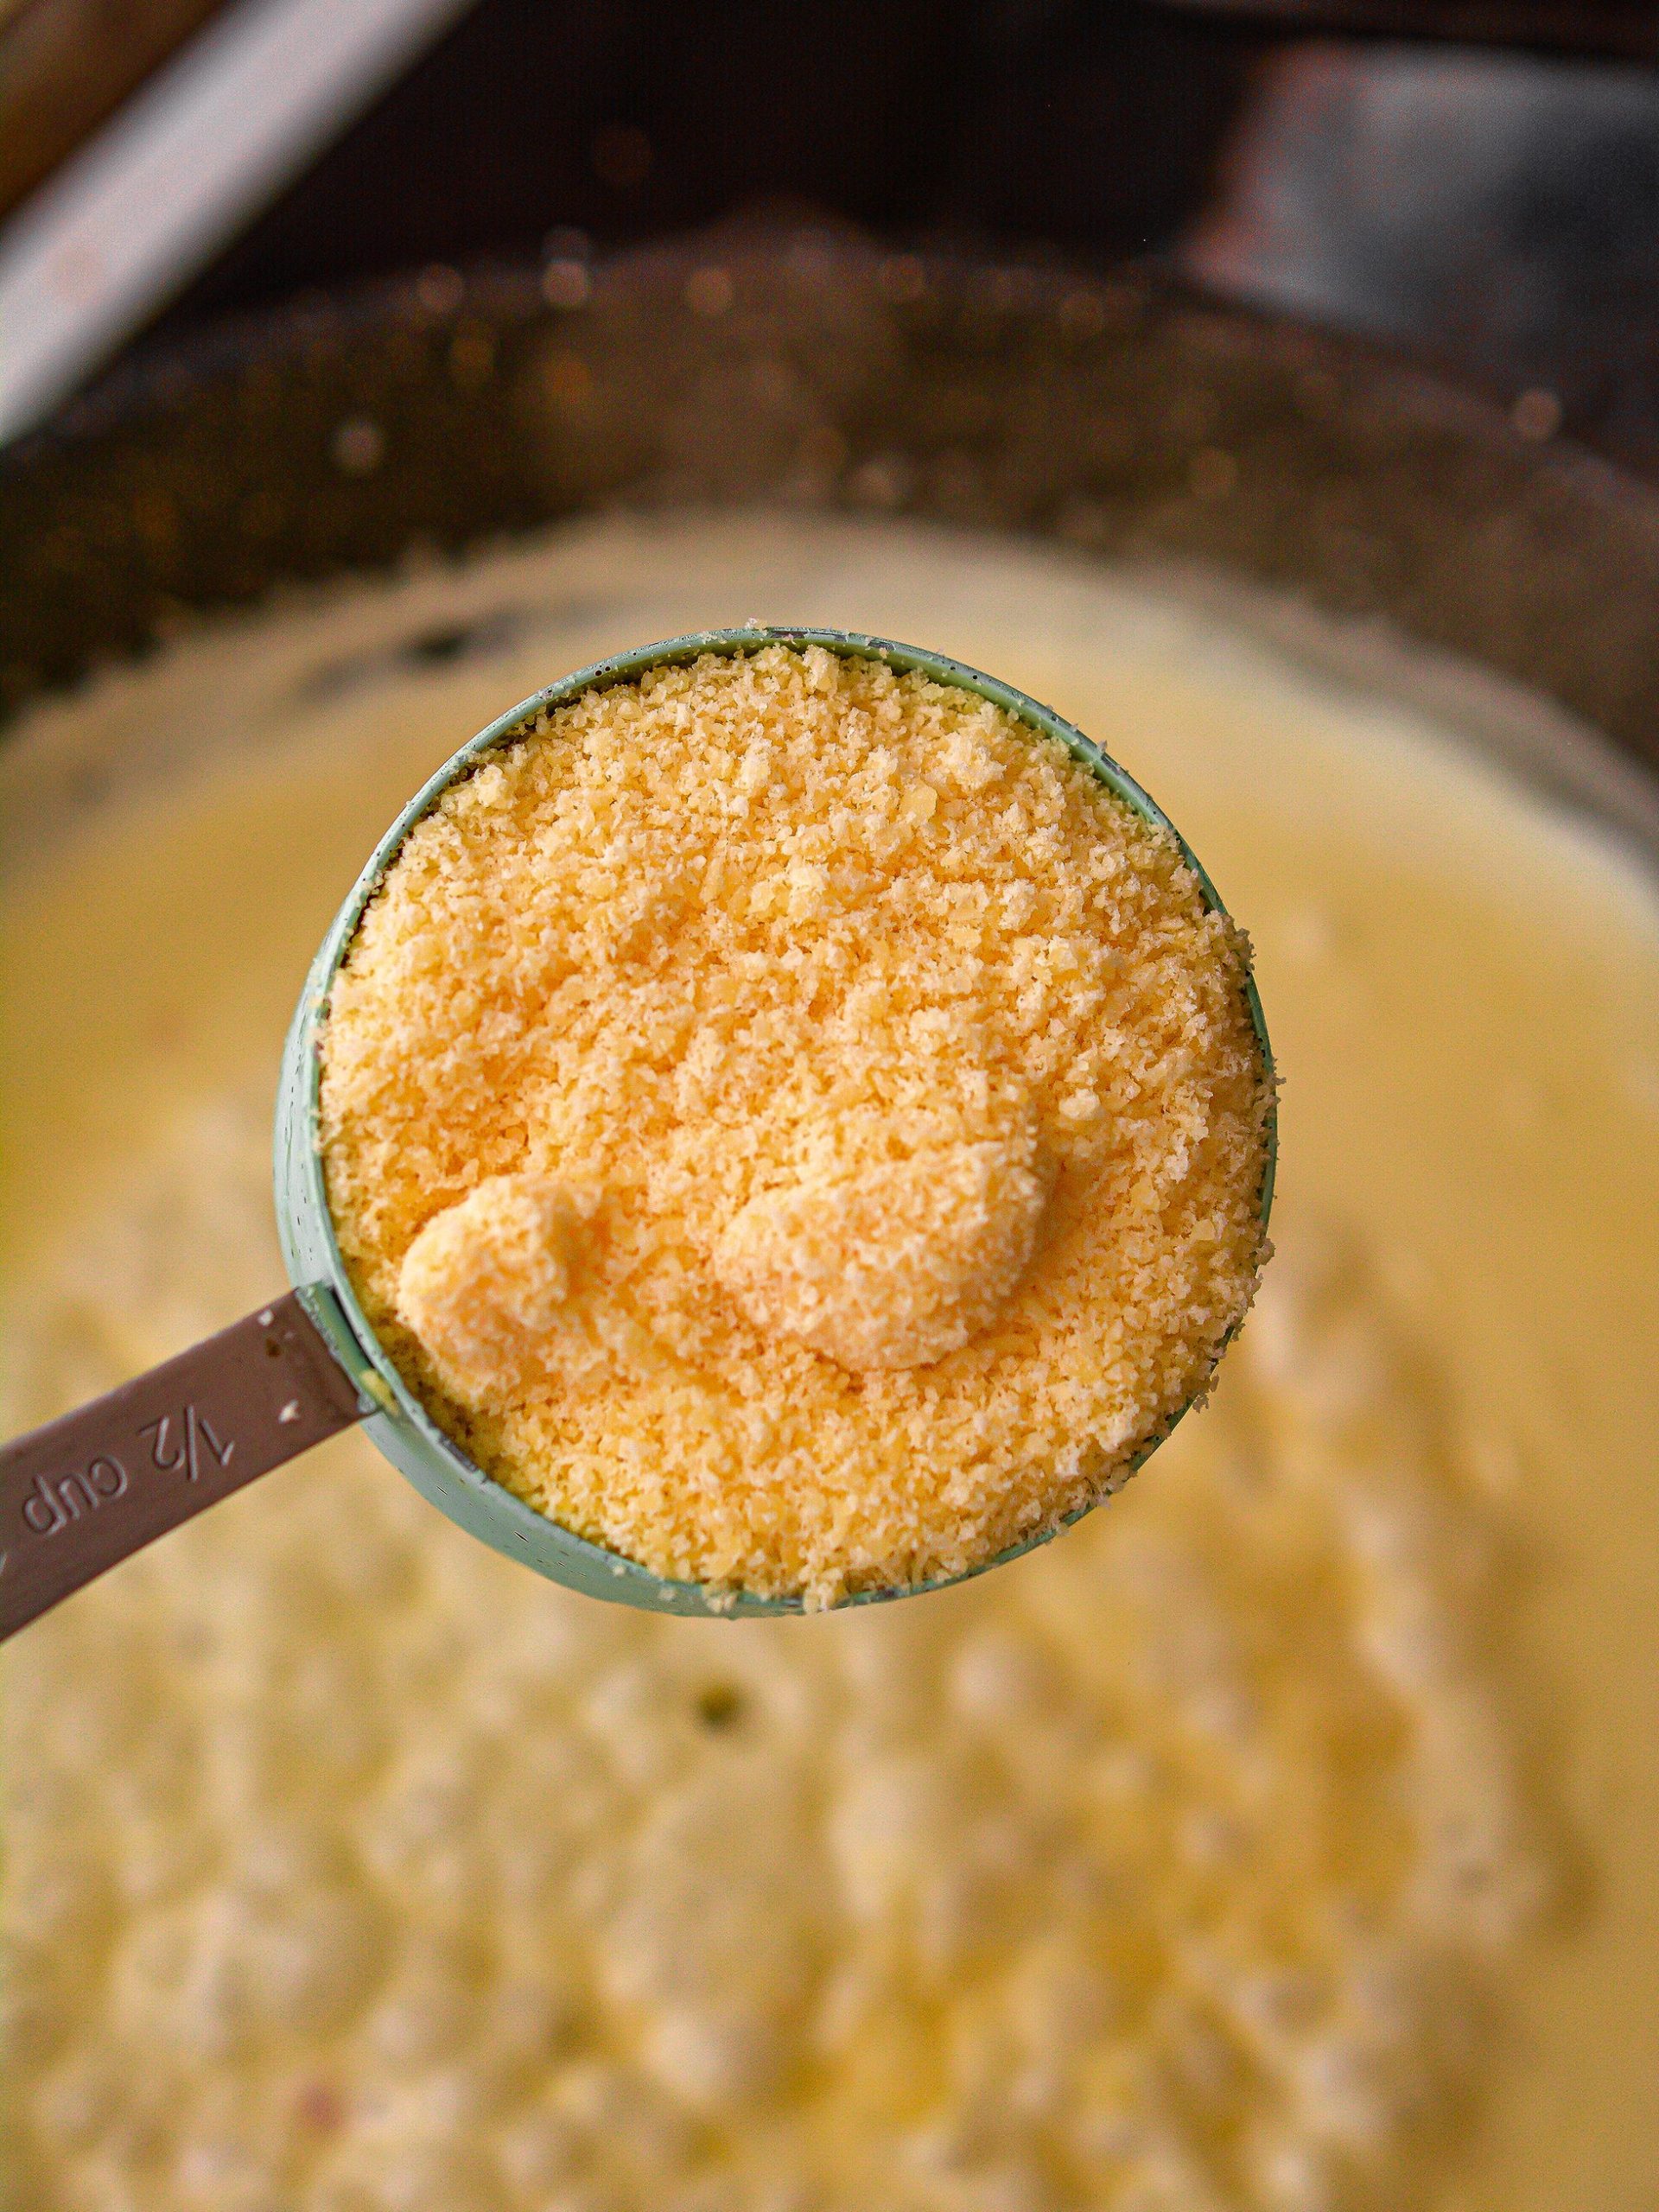 Stir in the parmesan cheese, and add salt and pepper to taste.